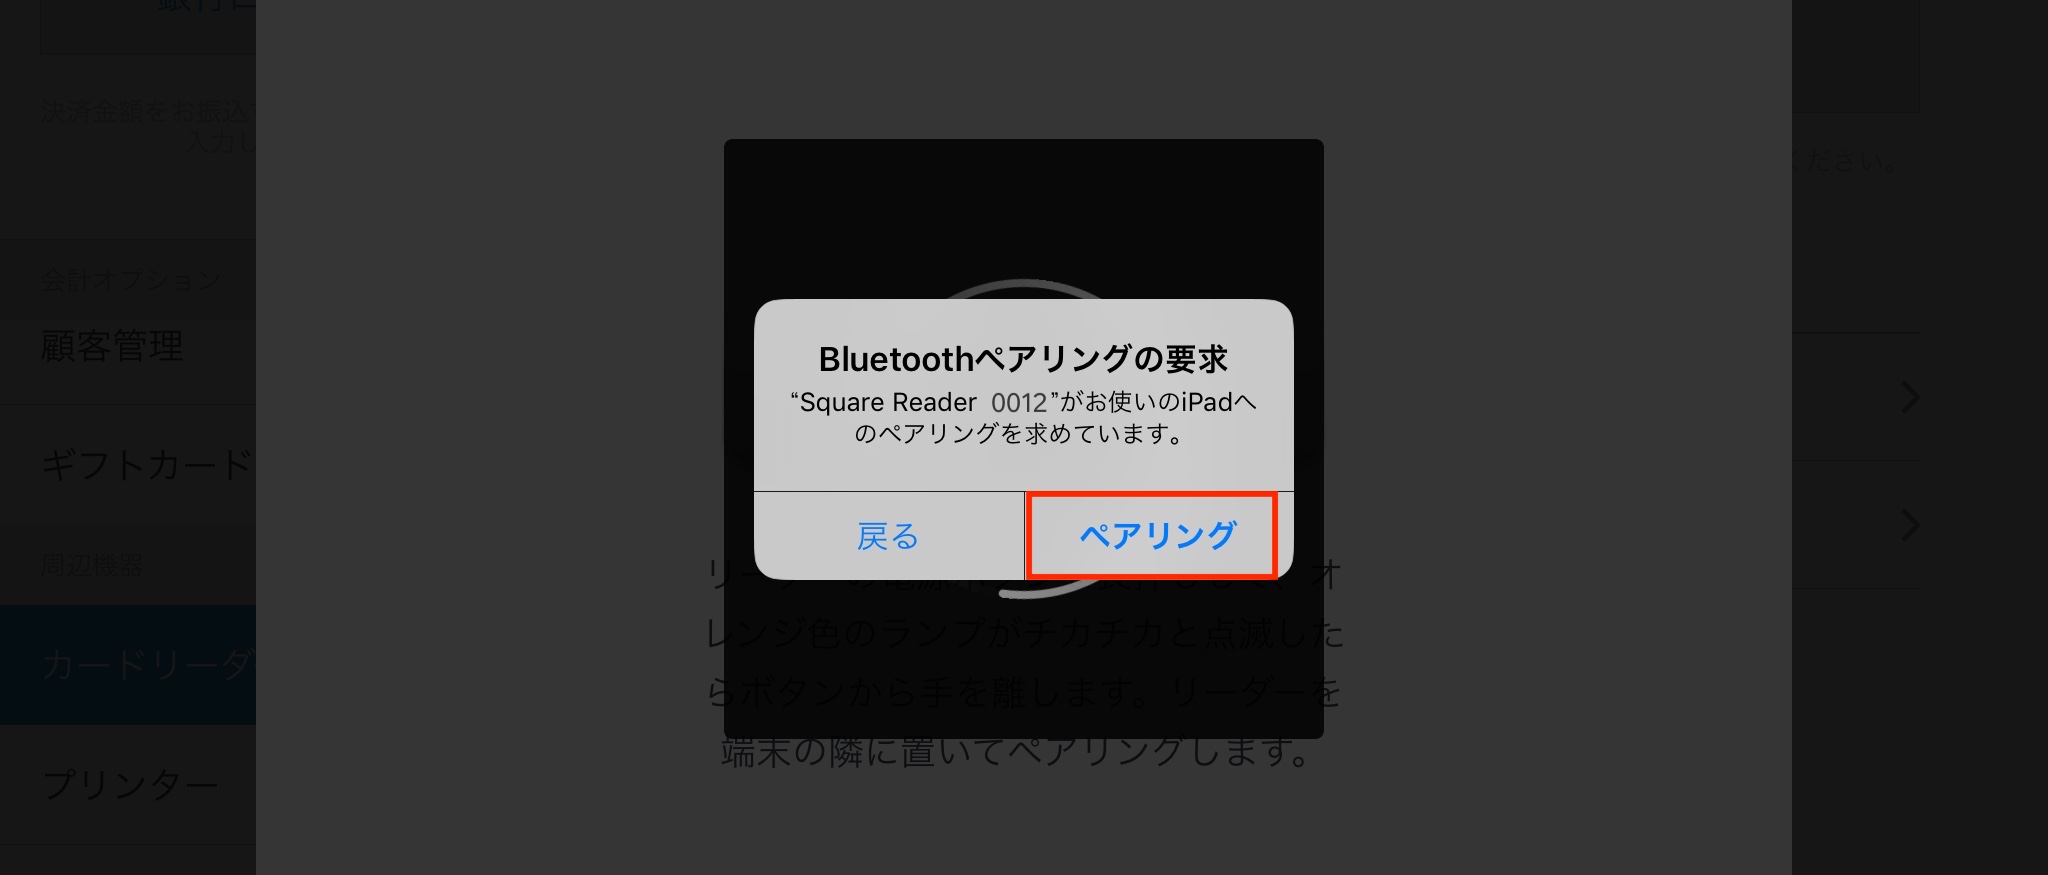 JP R12 Confirm the bluetooth pairing request